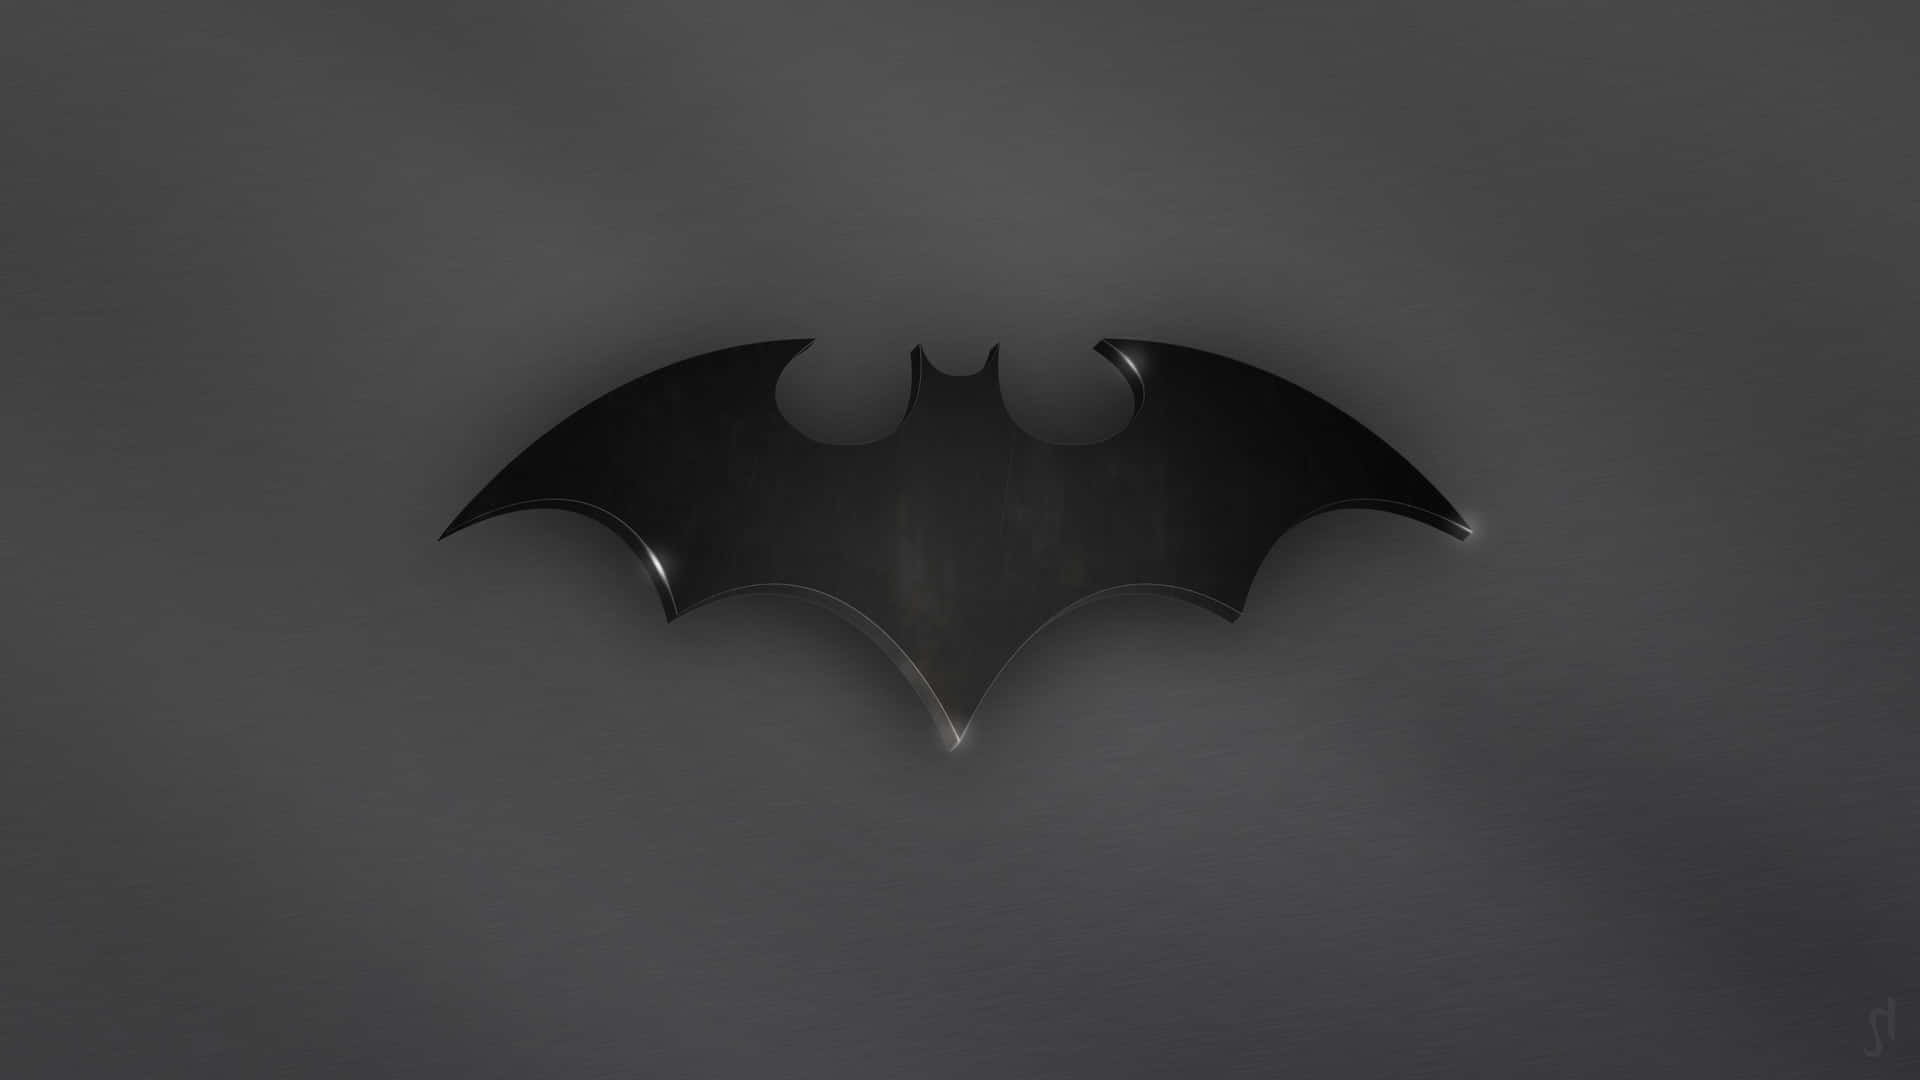 "Batman is Ready to Take on the Night!" Wallpaper